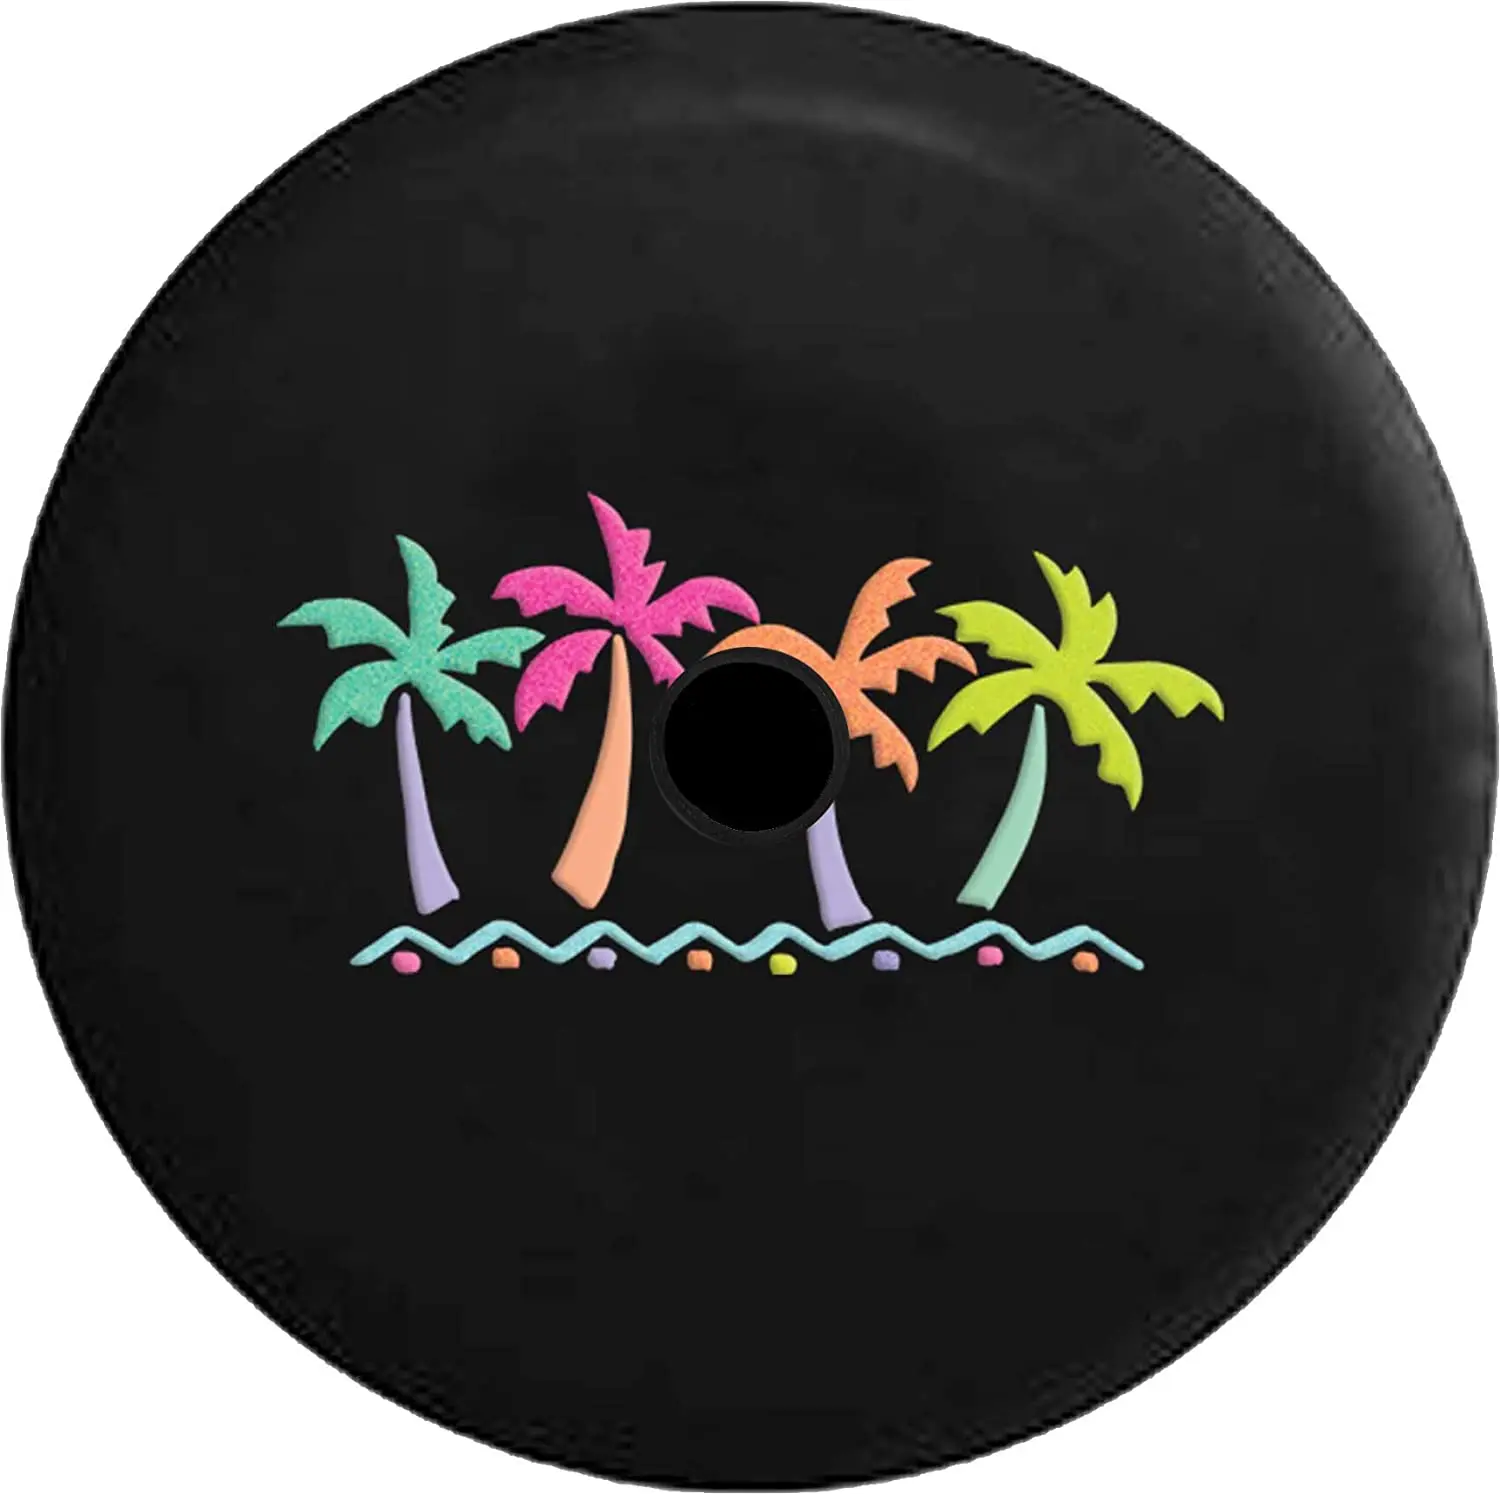 

Pike Outdoors JL Series Spare Tire Cover with Backup Camera Hole Tropical Palm Trees in Simple Beach Vacation Black 32 in